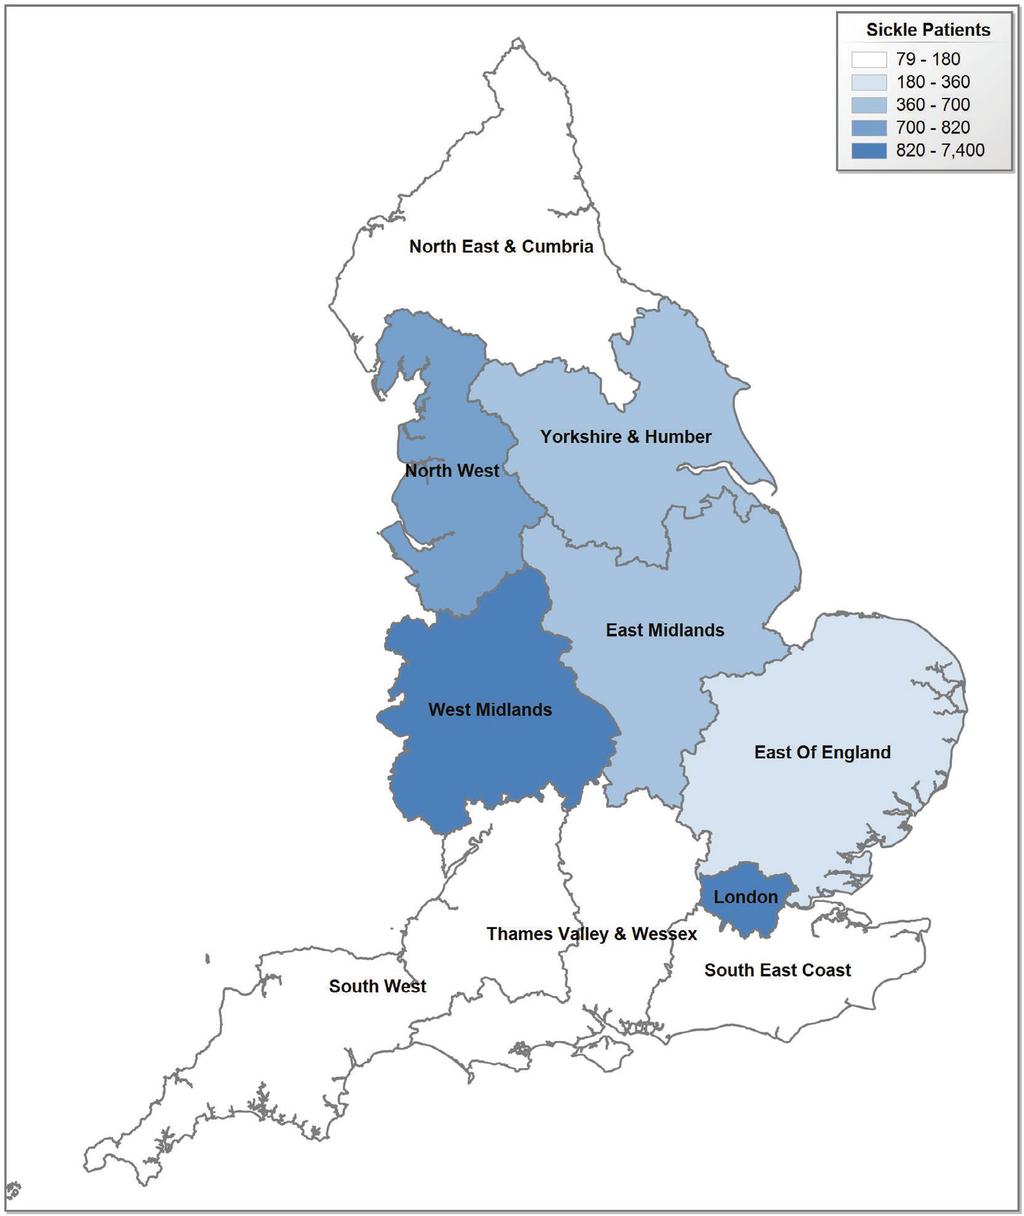 Sickle Cell Reports Figure 2.4 Map of Sickle Cell registrations by commissioning hub 2017/18 Table 2.4 Table of Sickle Cell registrations by commissioning hub 2017/18 Region No. Patients Region No.